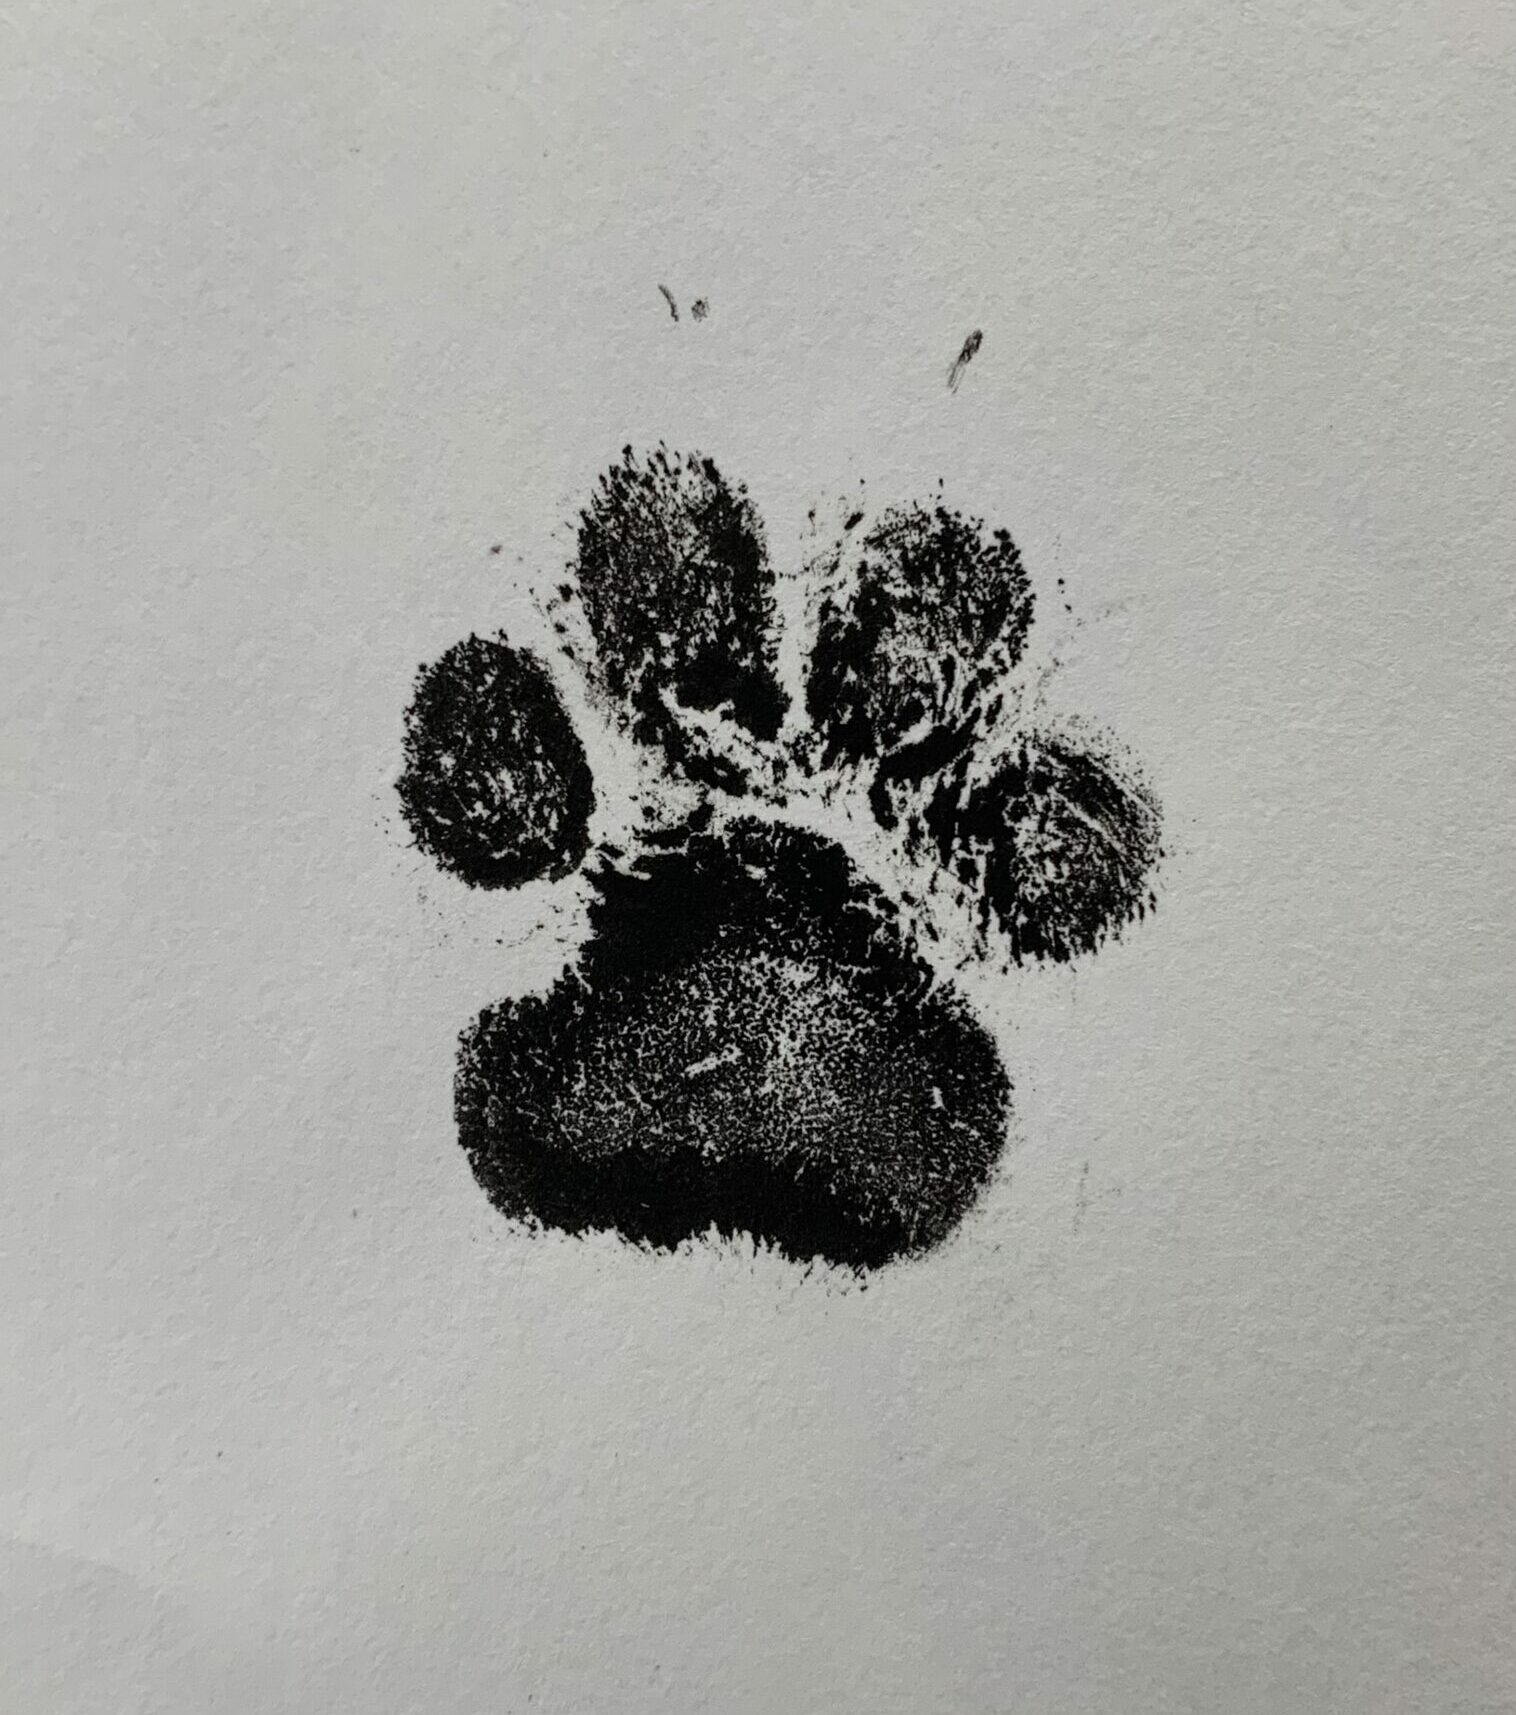 https://angelpaws.ca/wp-content/uploads/2021/02/Ink-Paw-Print-2-scaled-e1614092732846.jpg